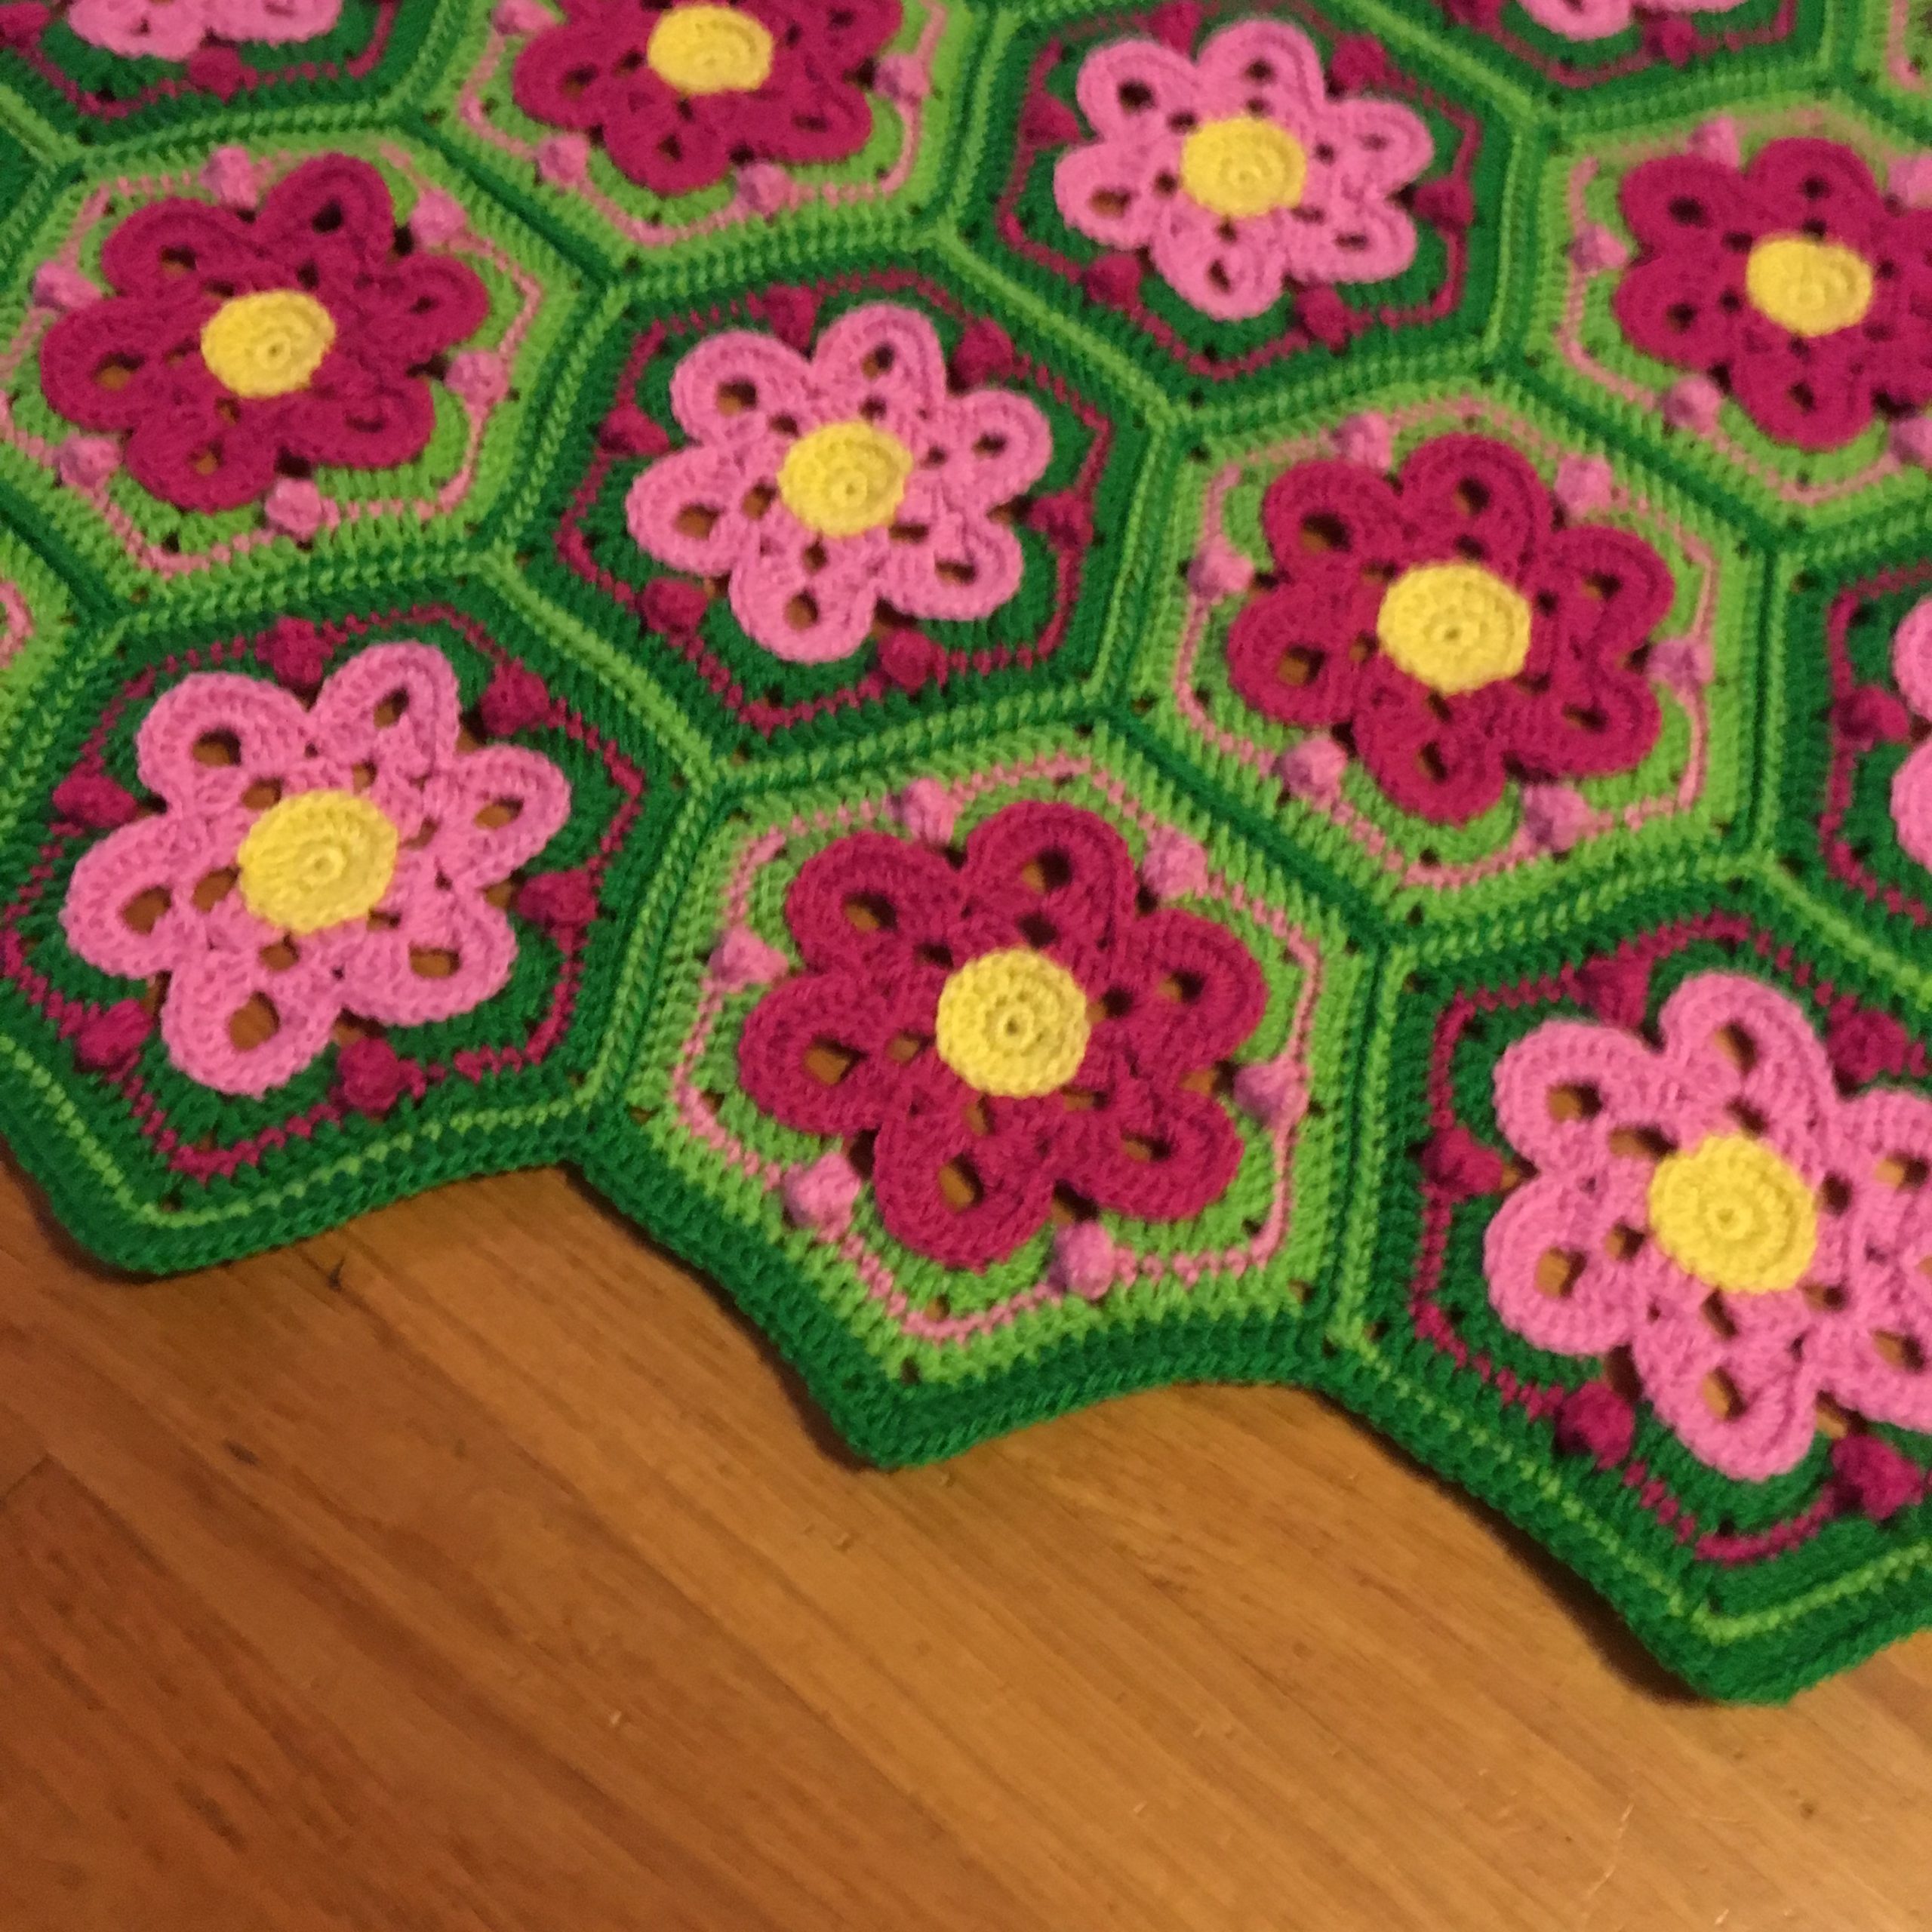 How to Crochet a Hexagon + Tips and Clear Photos